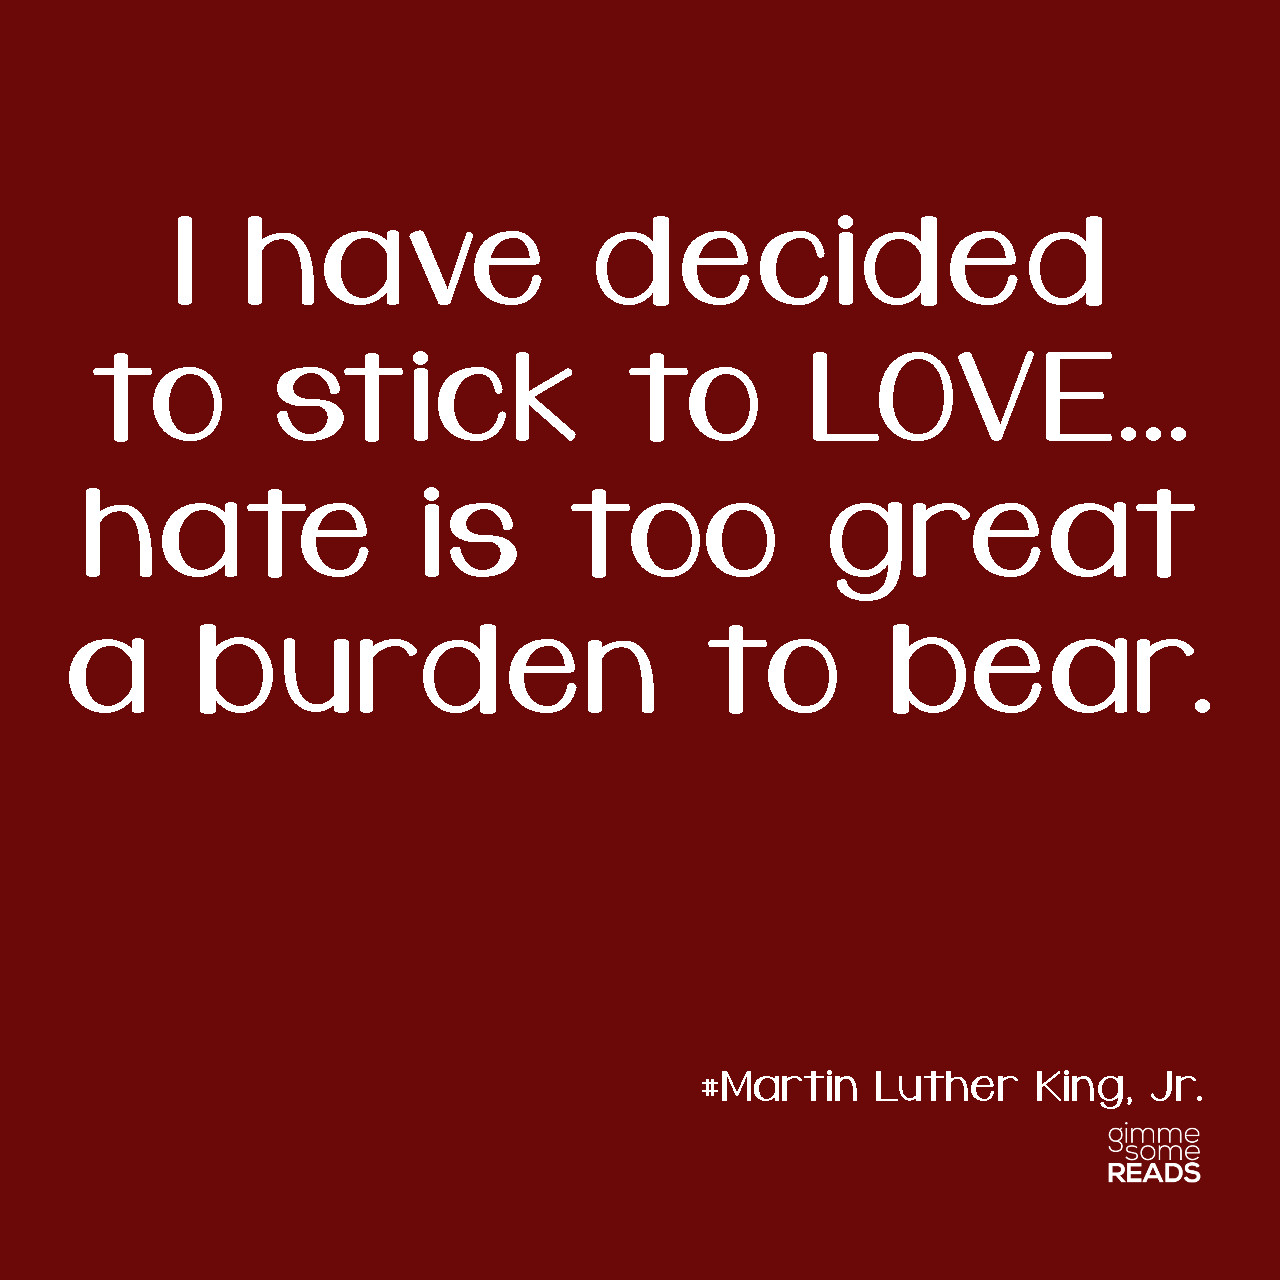 Martin Luther King Jr Quotes About Love
 Martin Luther King Jr Quotes about Love